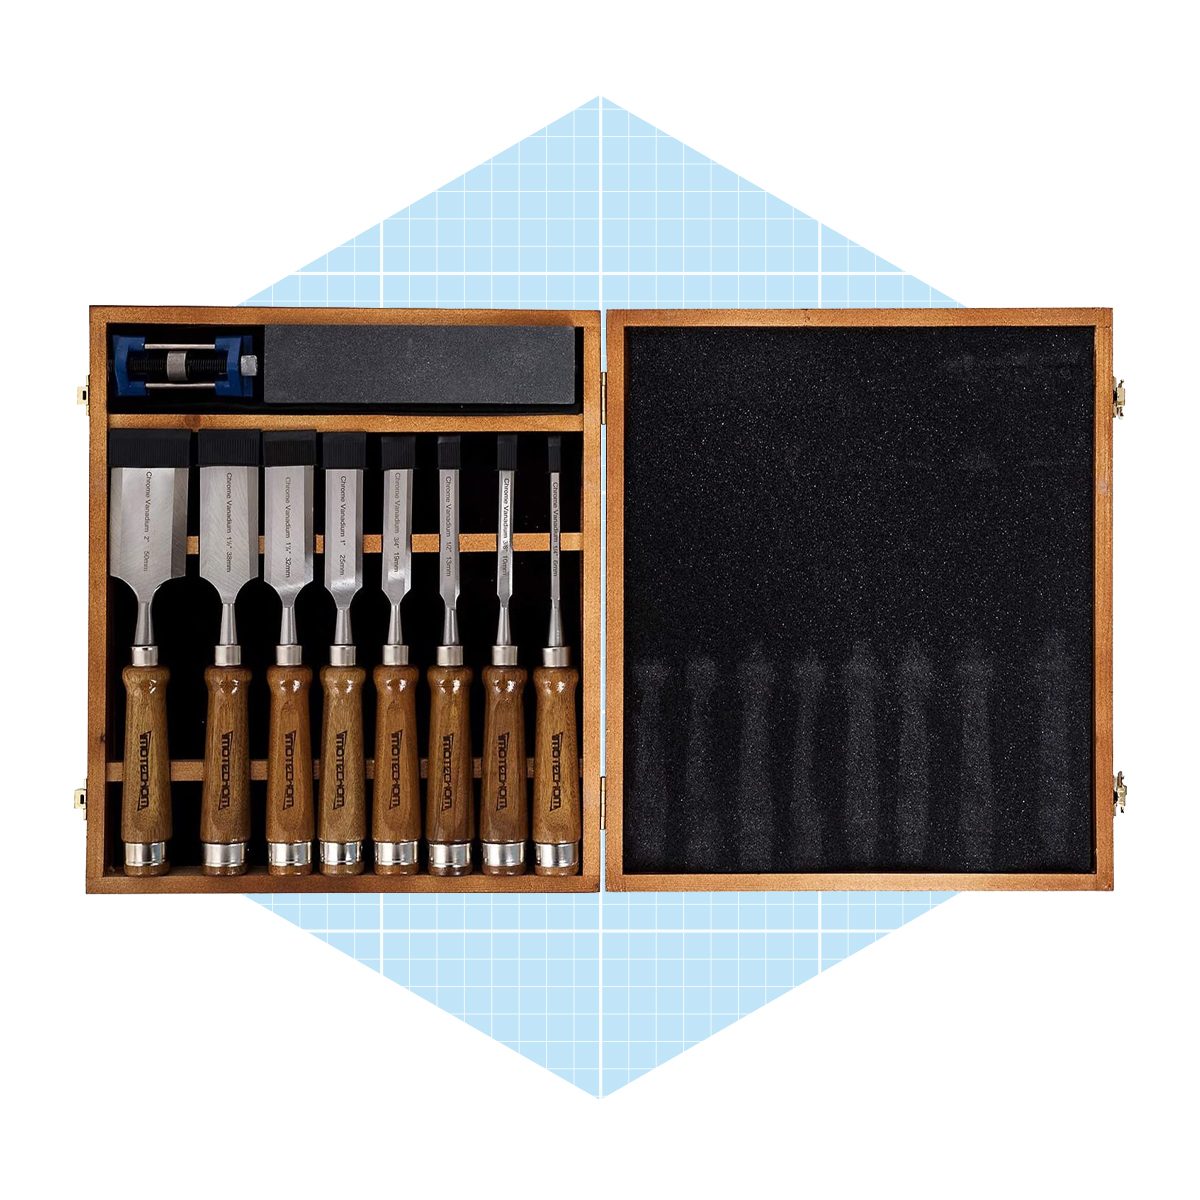 Schaaf Wood Carving Tools Set of 12 Chisels with Canvas Case